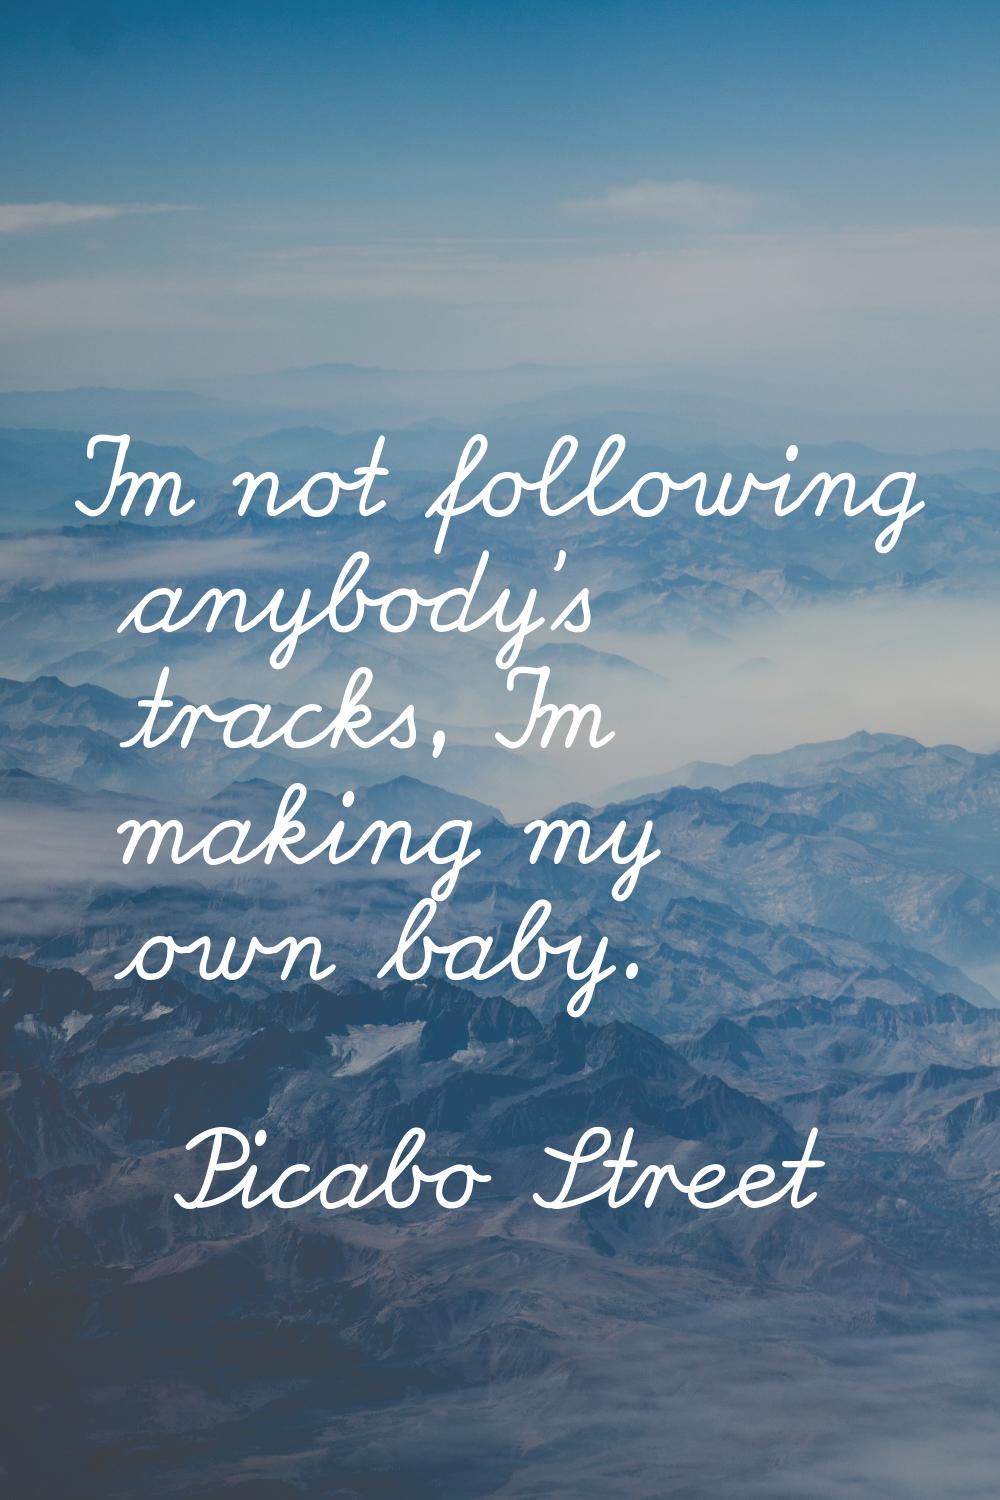 I'm not following anybody's tracks, I'm making my own baby.